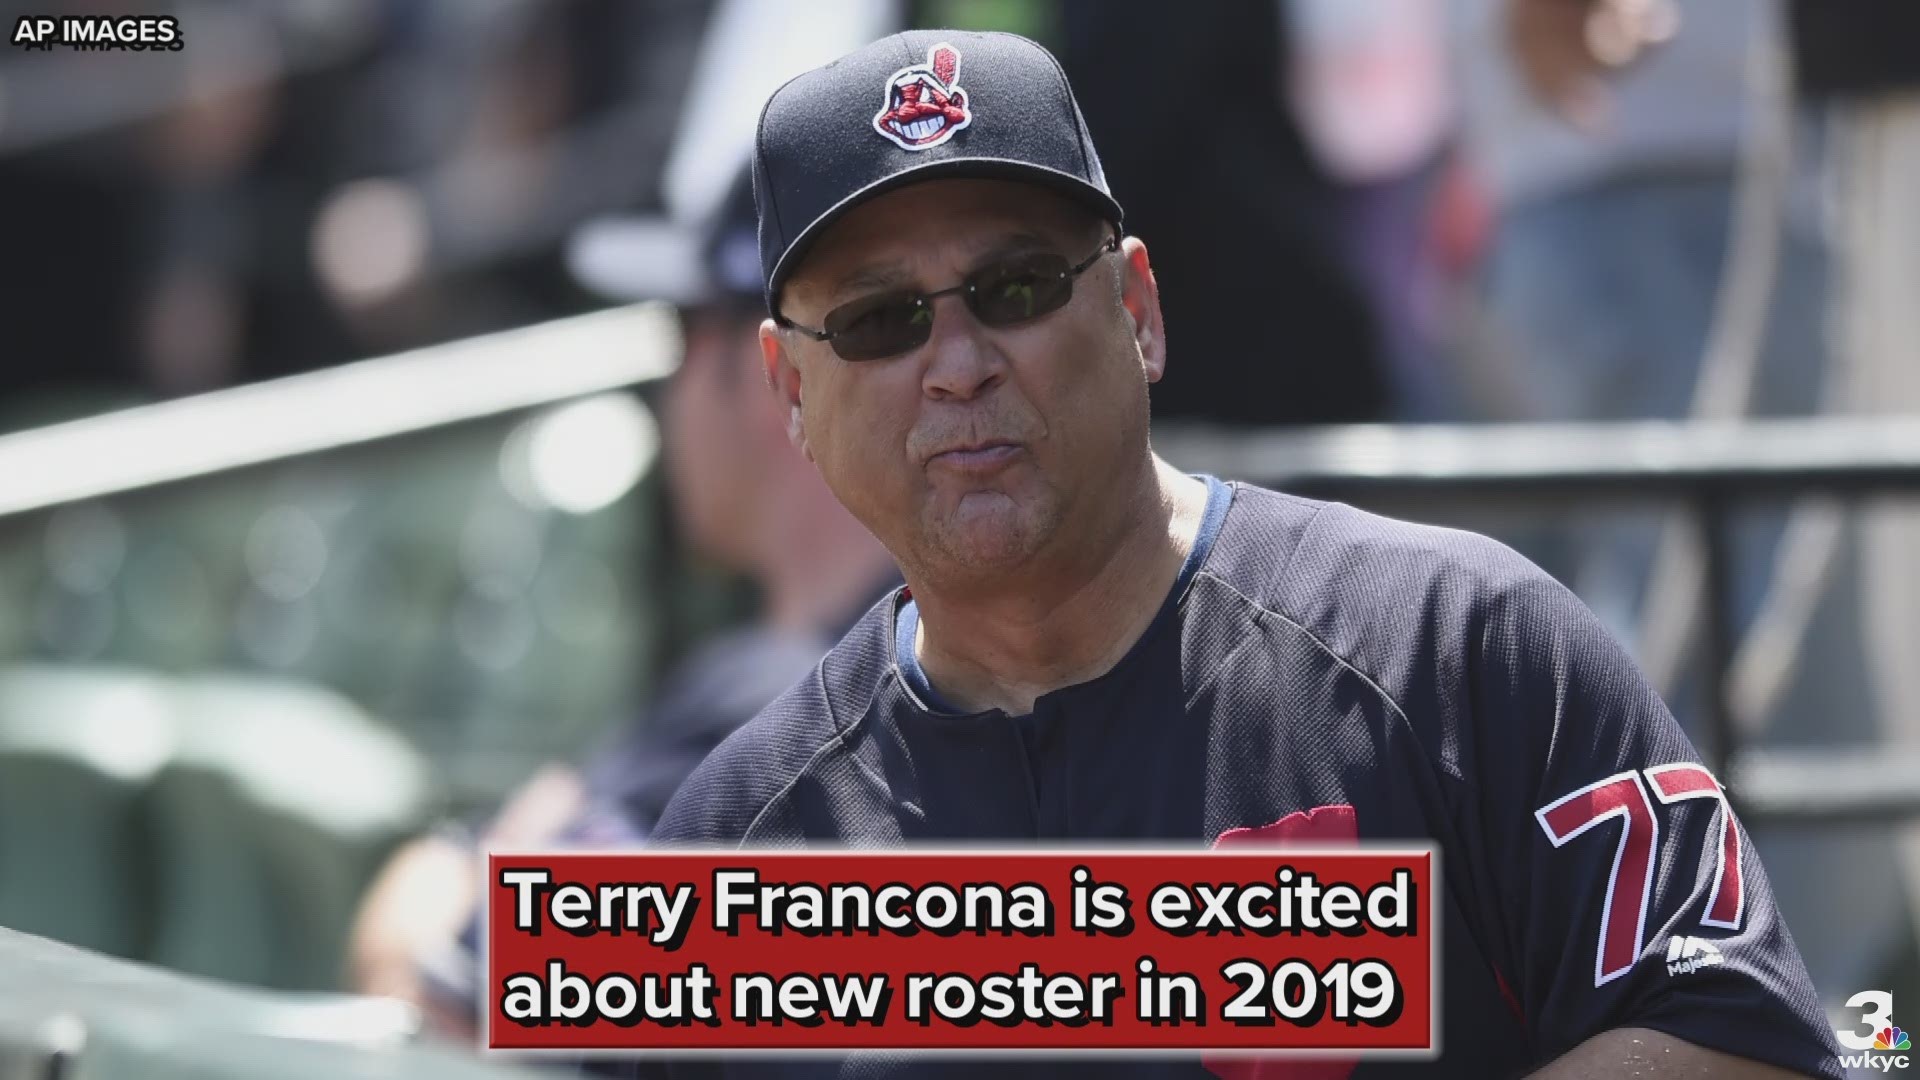 Manager Terry Francona believes starting over again with the Cleveland Indians is kind of exciting heading into the 2019 season.